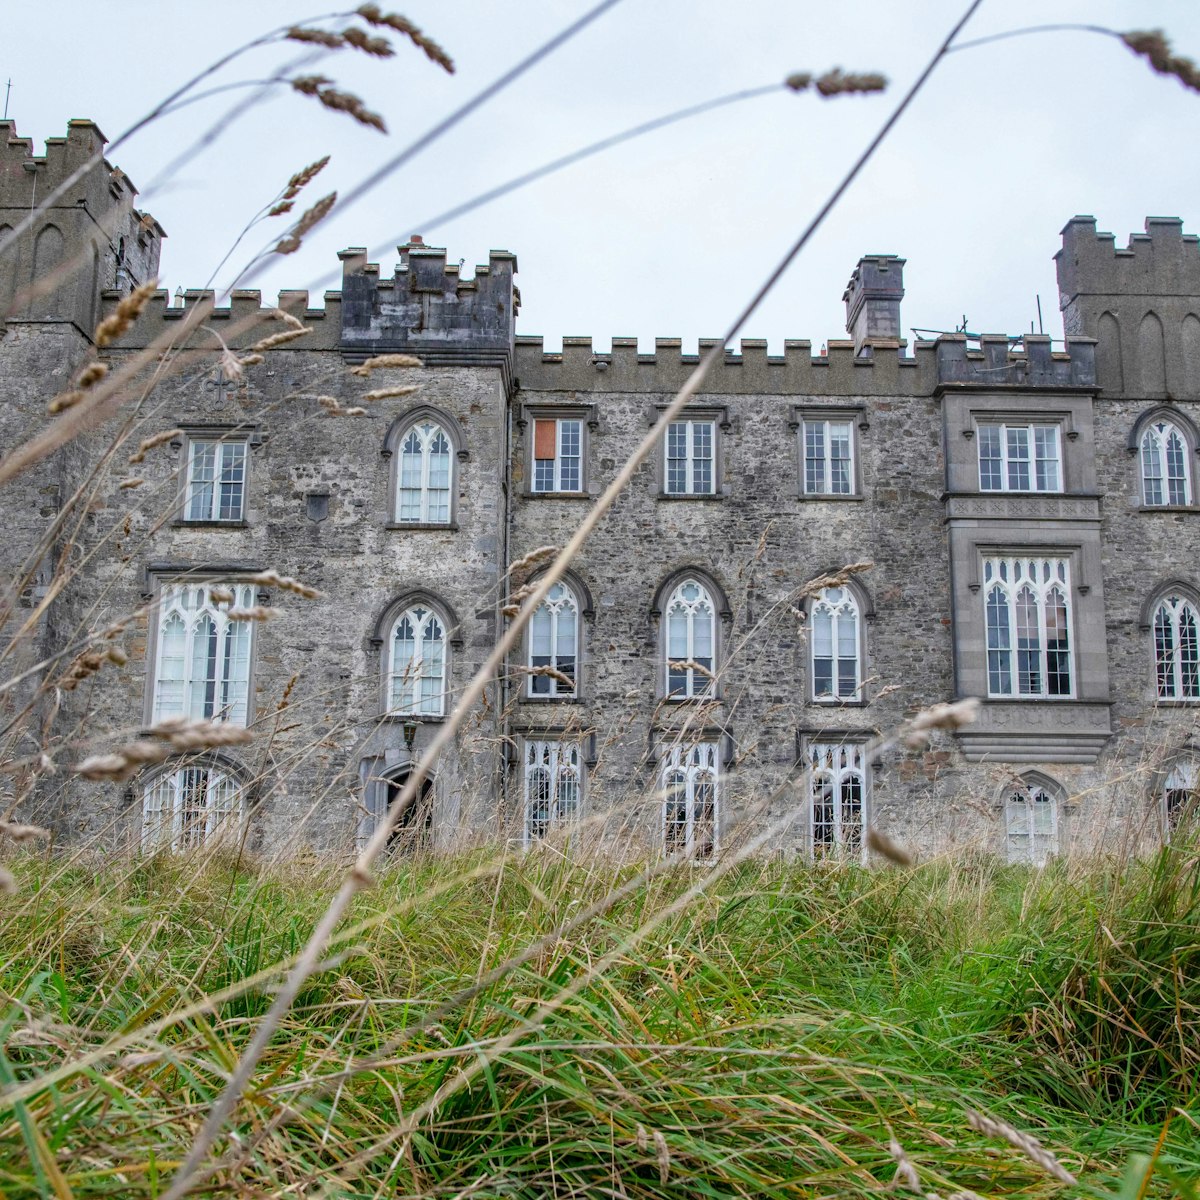 IRELAND-ENVIRONMENT-CLIMATE-NATURE
A picture shows Dunsany Castle, the seat of Randal Plunkett, Baron of Dunsany, in Dunsany, northwest of Dublin, Ireland, on October 13, 2021. - Randal Plunkett, the 21st Baron of Dunsany, strides out of his Irish castle in a t-shirt bearing the name of the US death metal band "Cannibal Corpse" in bloody lettering. In the distance, a russet-coloured stag appears for a moment, bracketed by impossibly green trees, before dissolving into the 750 acres (300 hectares) of ancestral estate Plunkett has surrendered to the wilderness. - TO GO WITH AFP STORY BY JOE STENSON (Photo by Paul Faith / AFP) / TO GO WITH AFP STORY BY JOE STENSON (Photo by PAUL FAITH/AFP via Getty Images)